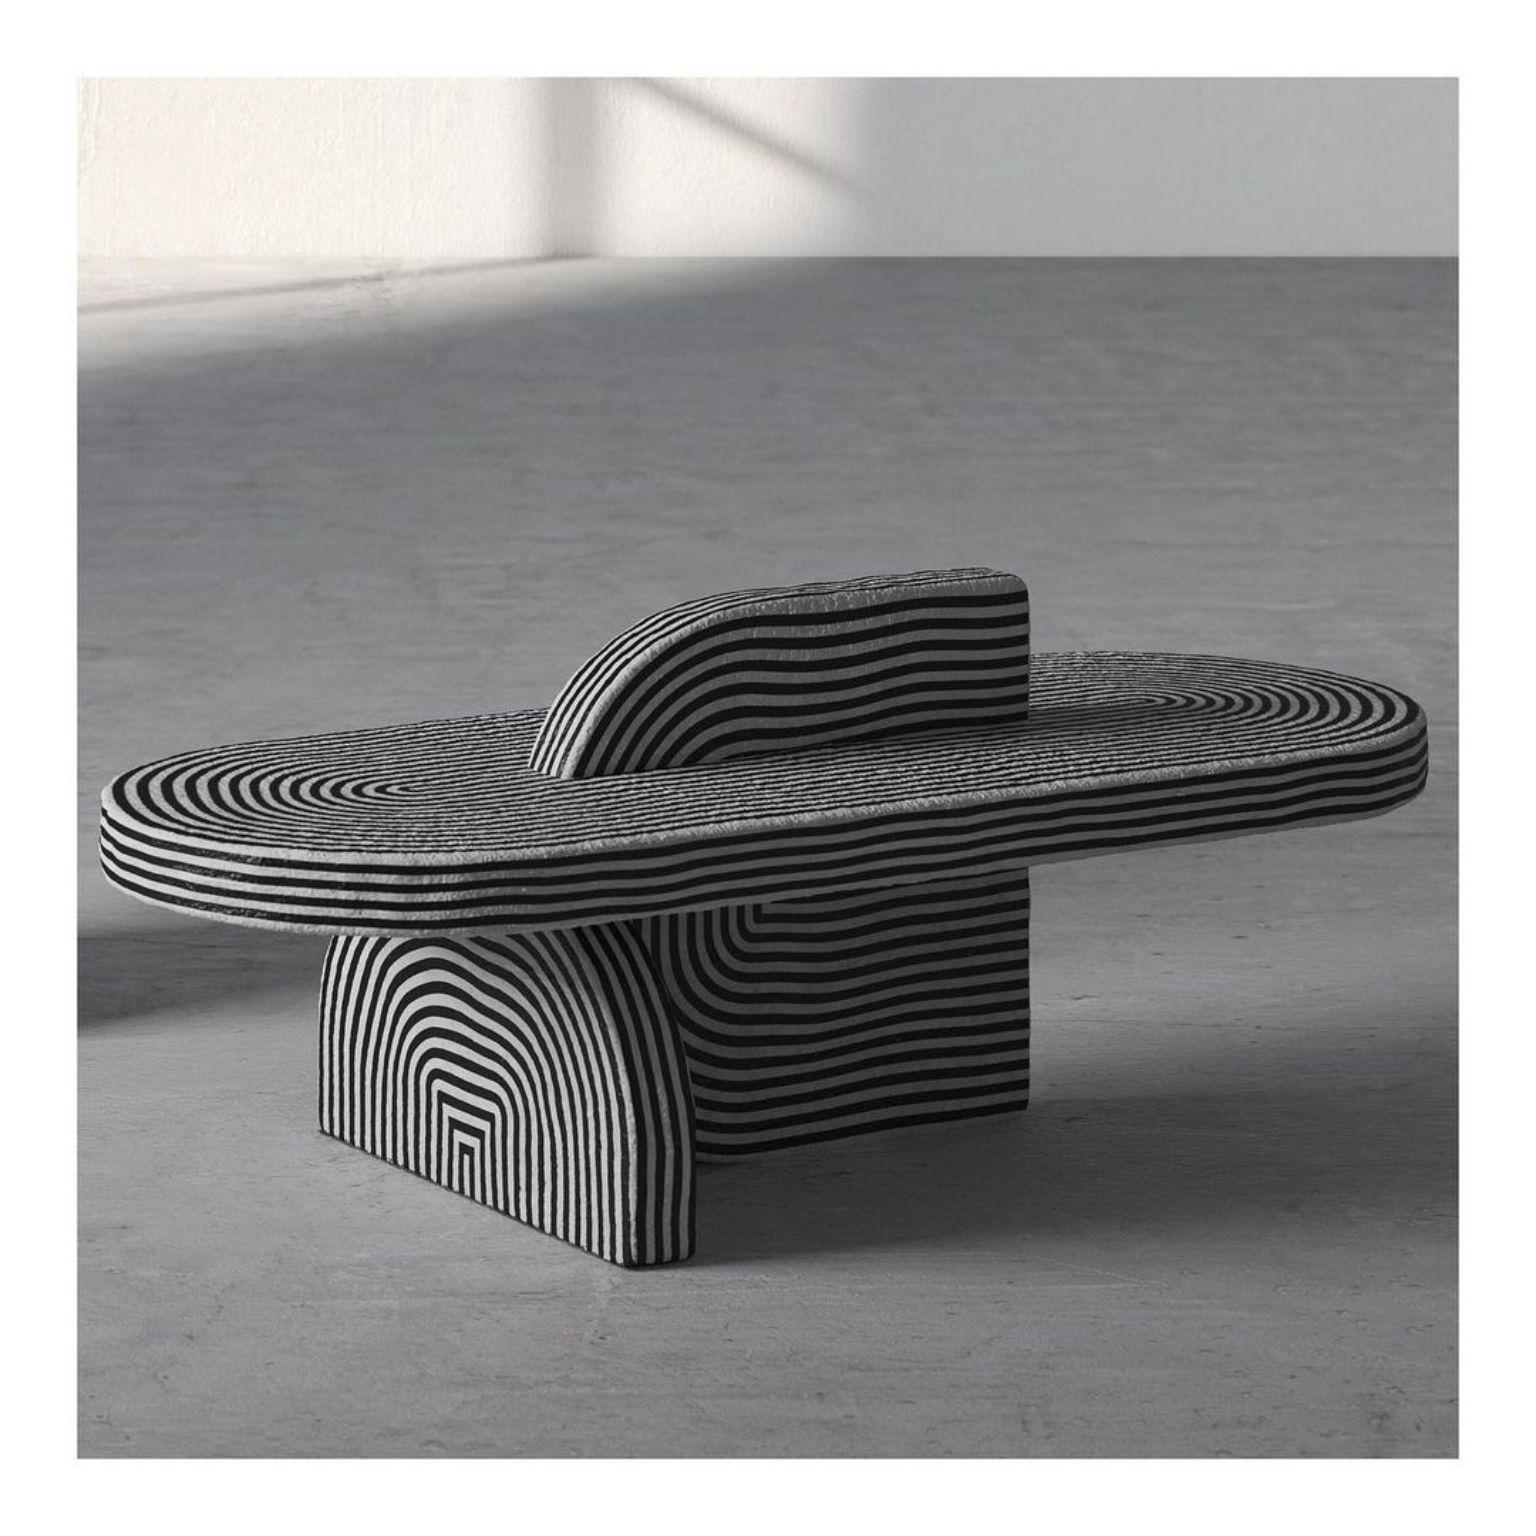 After Ago central table by Richard Yasmine
Materials: Foam, lightweight concrete, plaster, acrylic
Dimensions: H 42cm/52 x W 55 x L 140cm

AFTER AGO” is an ode to an arch, a tribute to a city, an elegy of lost souls, altogether converted to